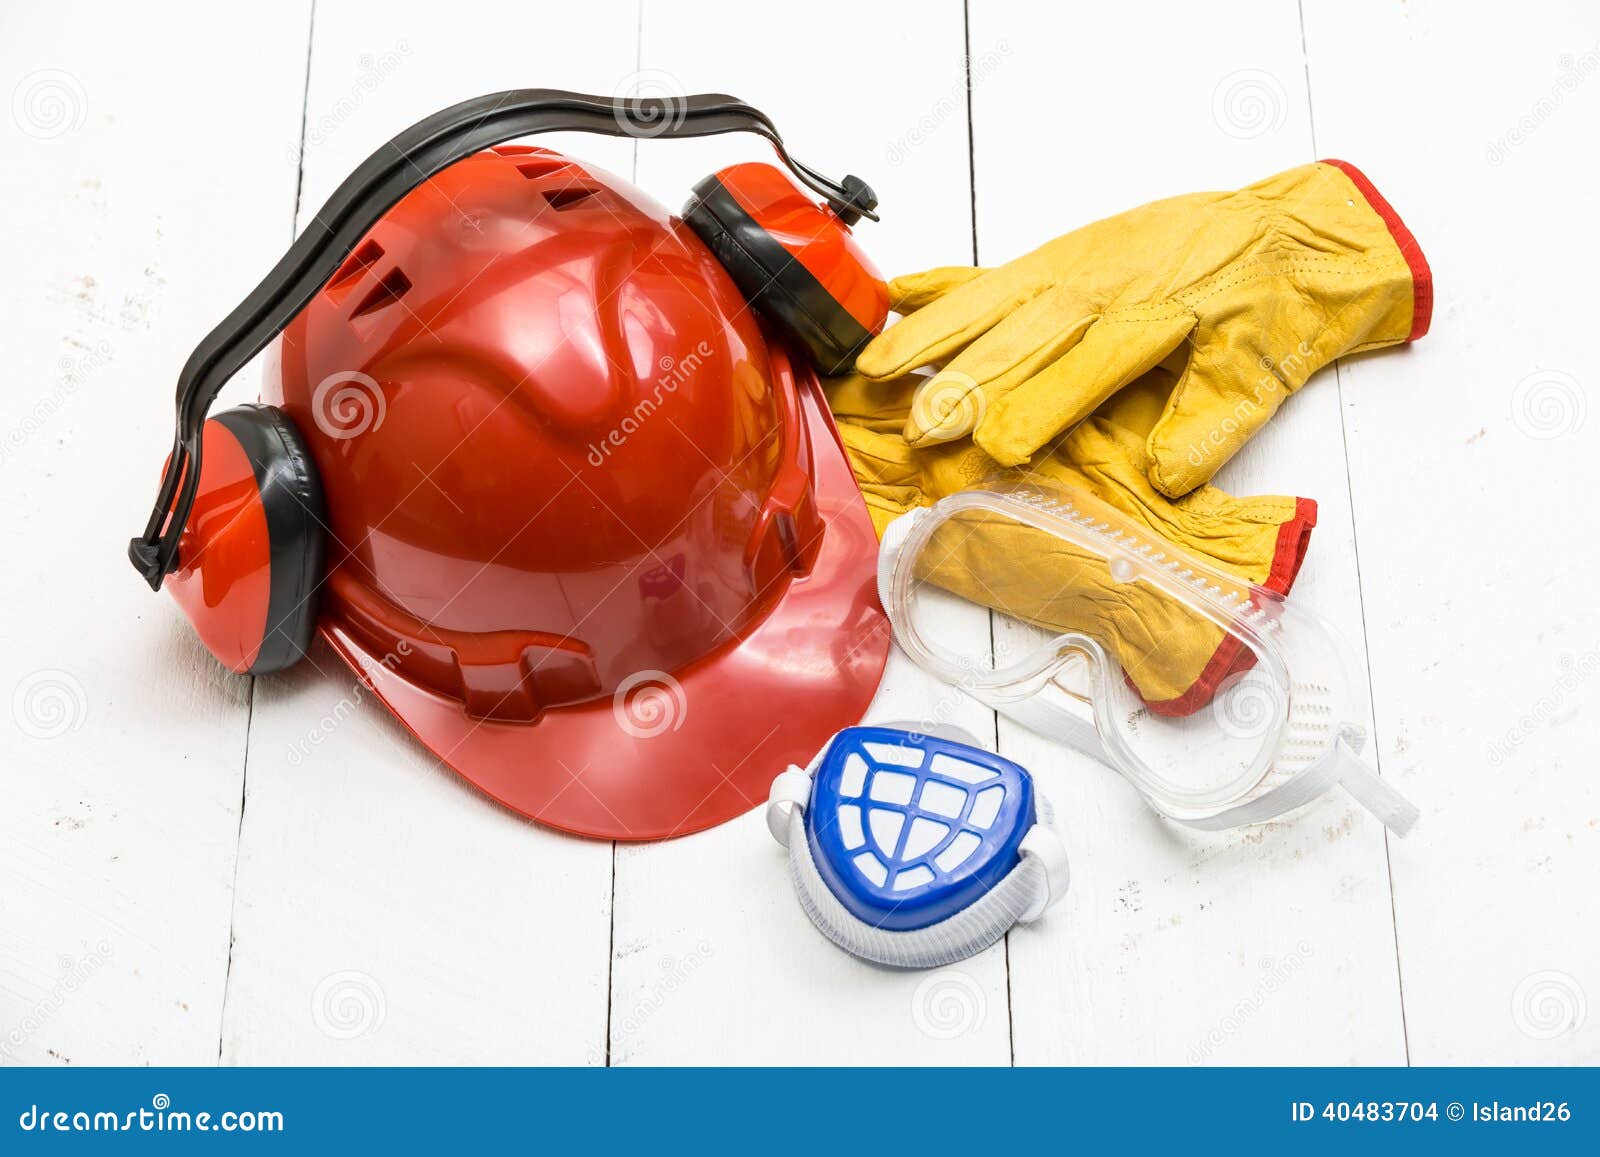 construction protective workwear